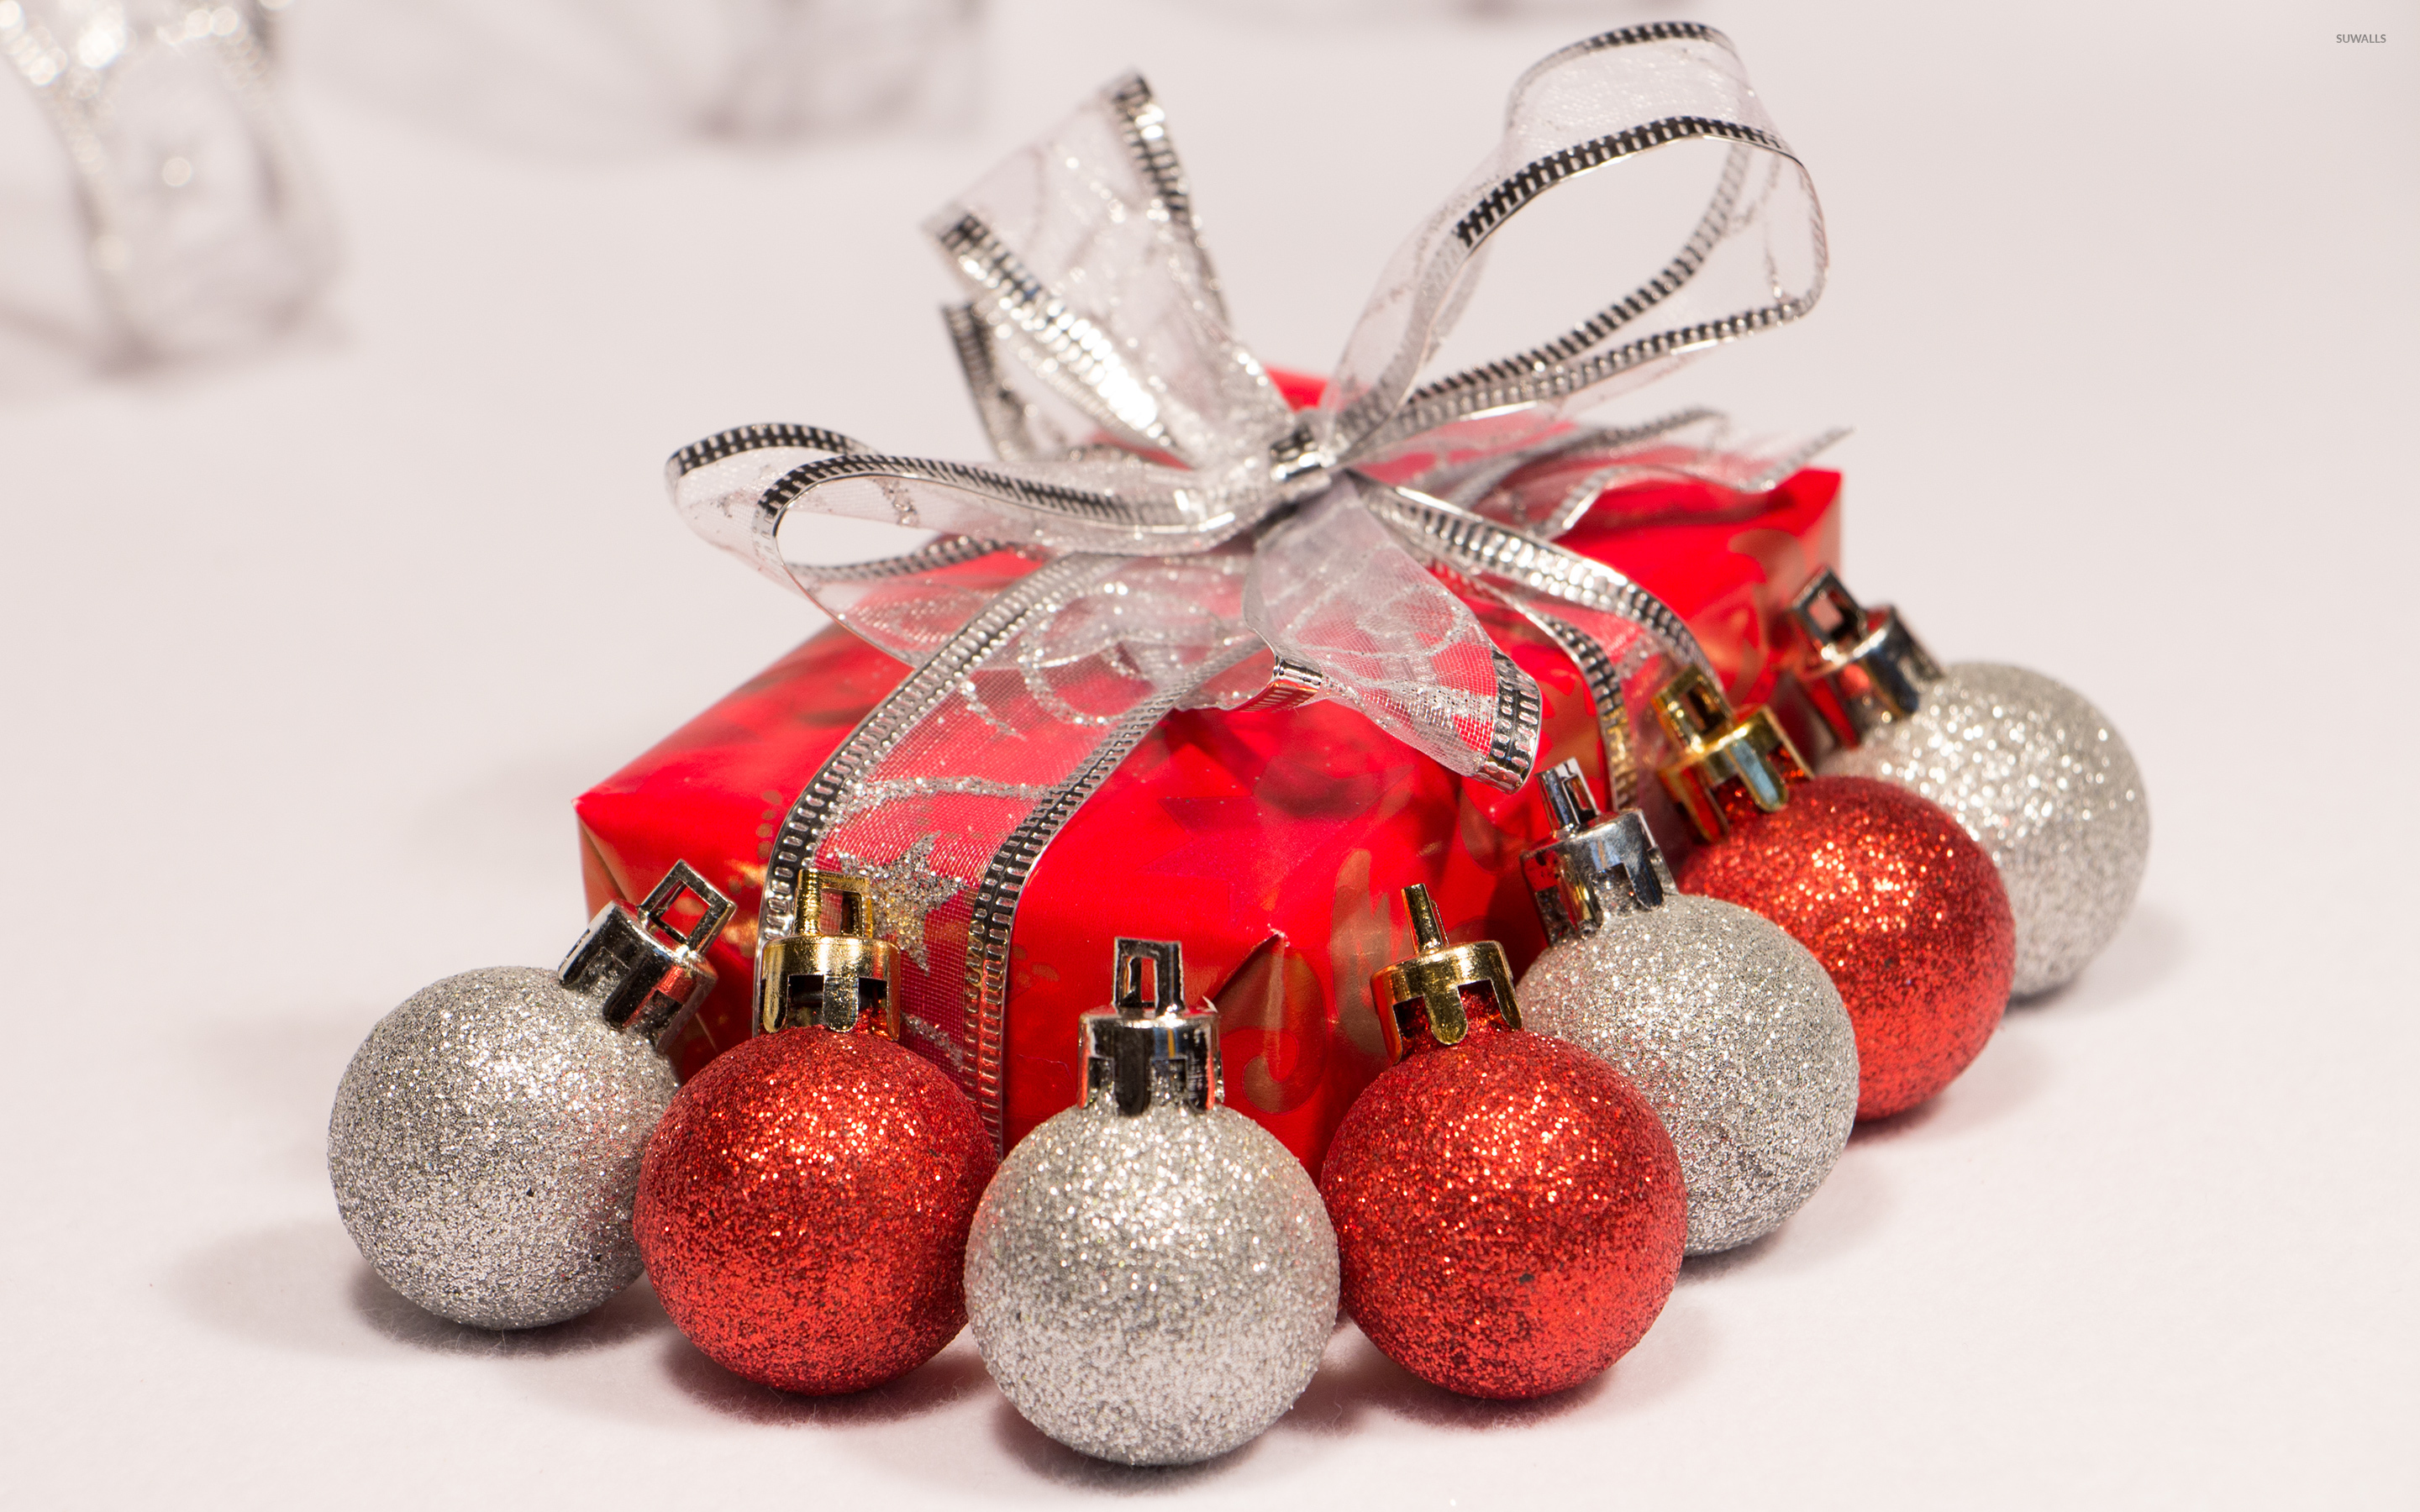 Red and silver baubles by the Christmas present wallpaper wallpaper